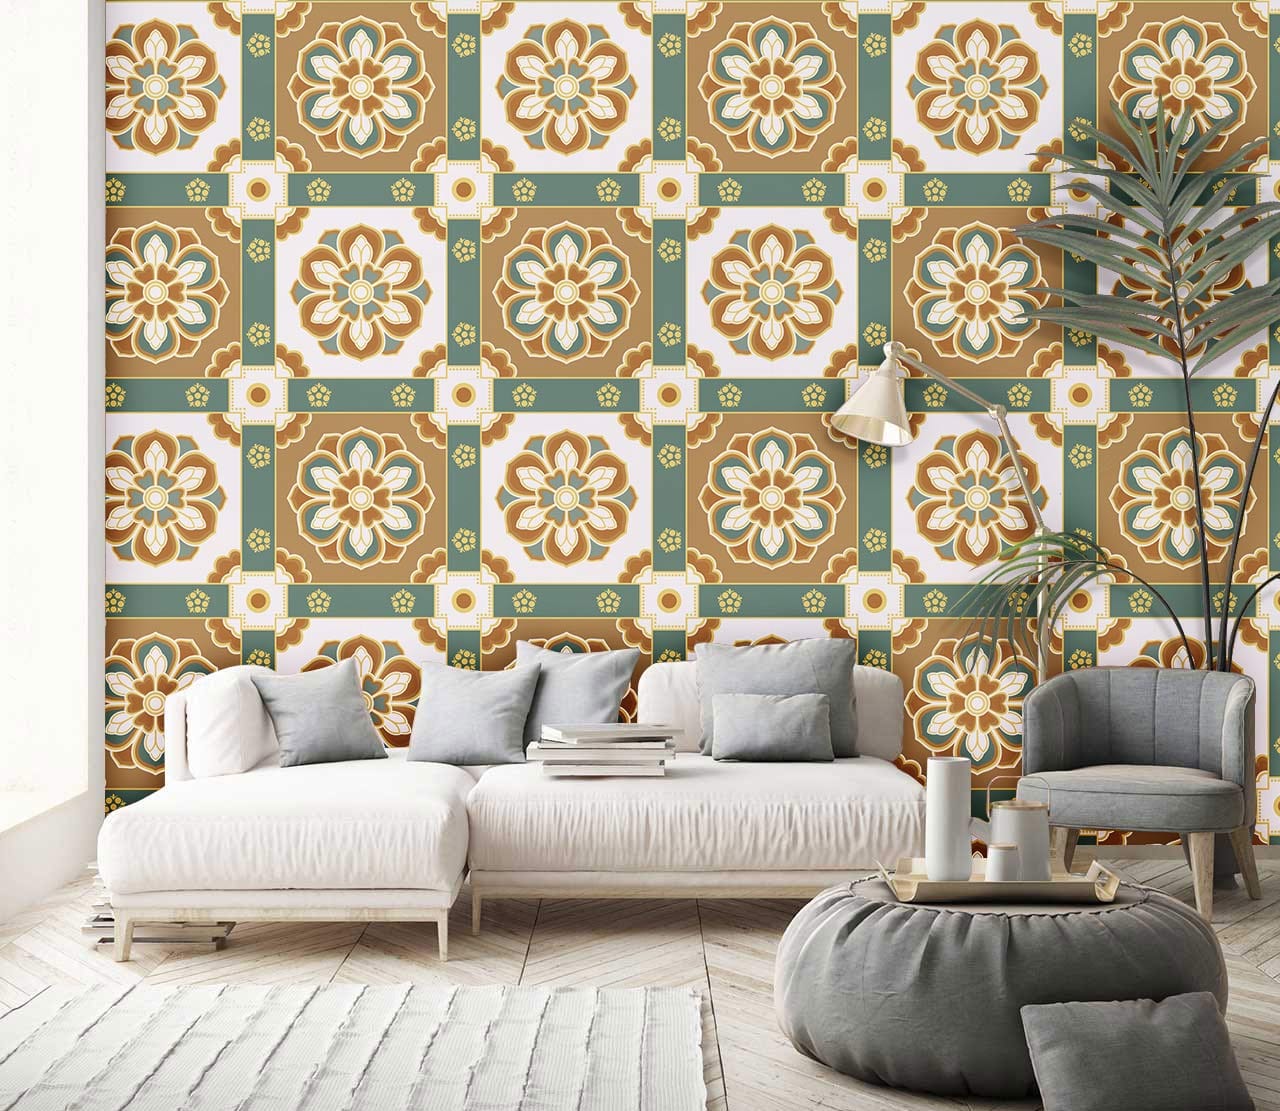 Living Room Wallpaper Mural Designed in the Style of the Palace